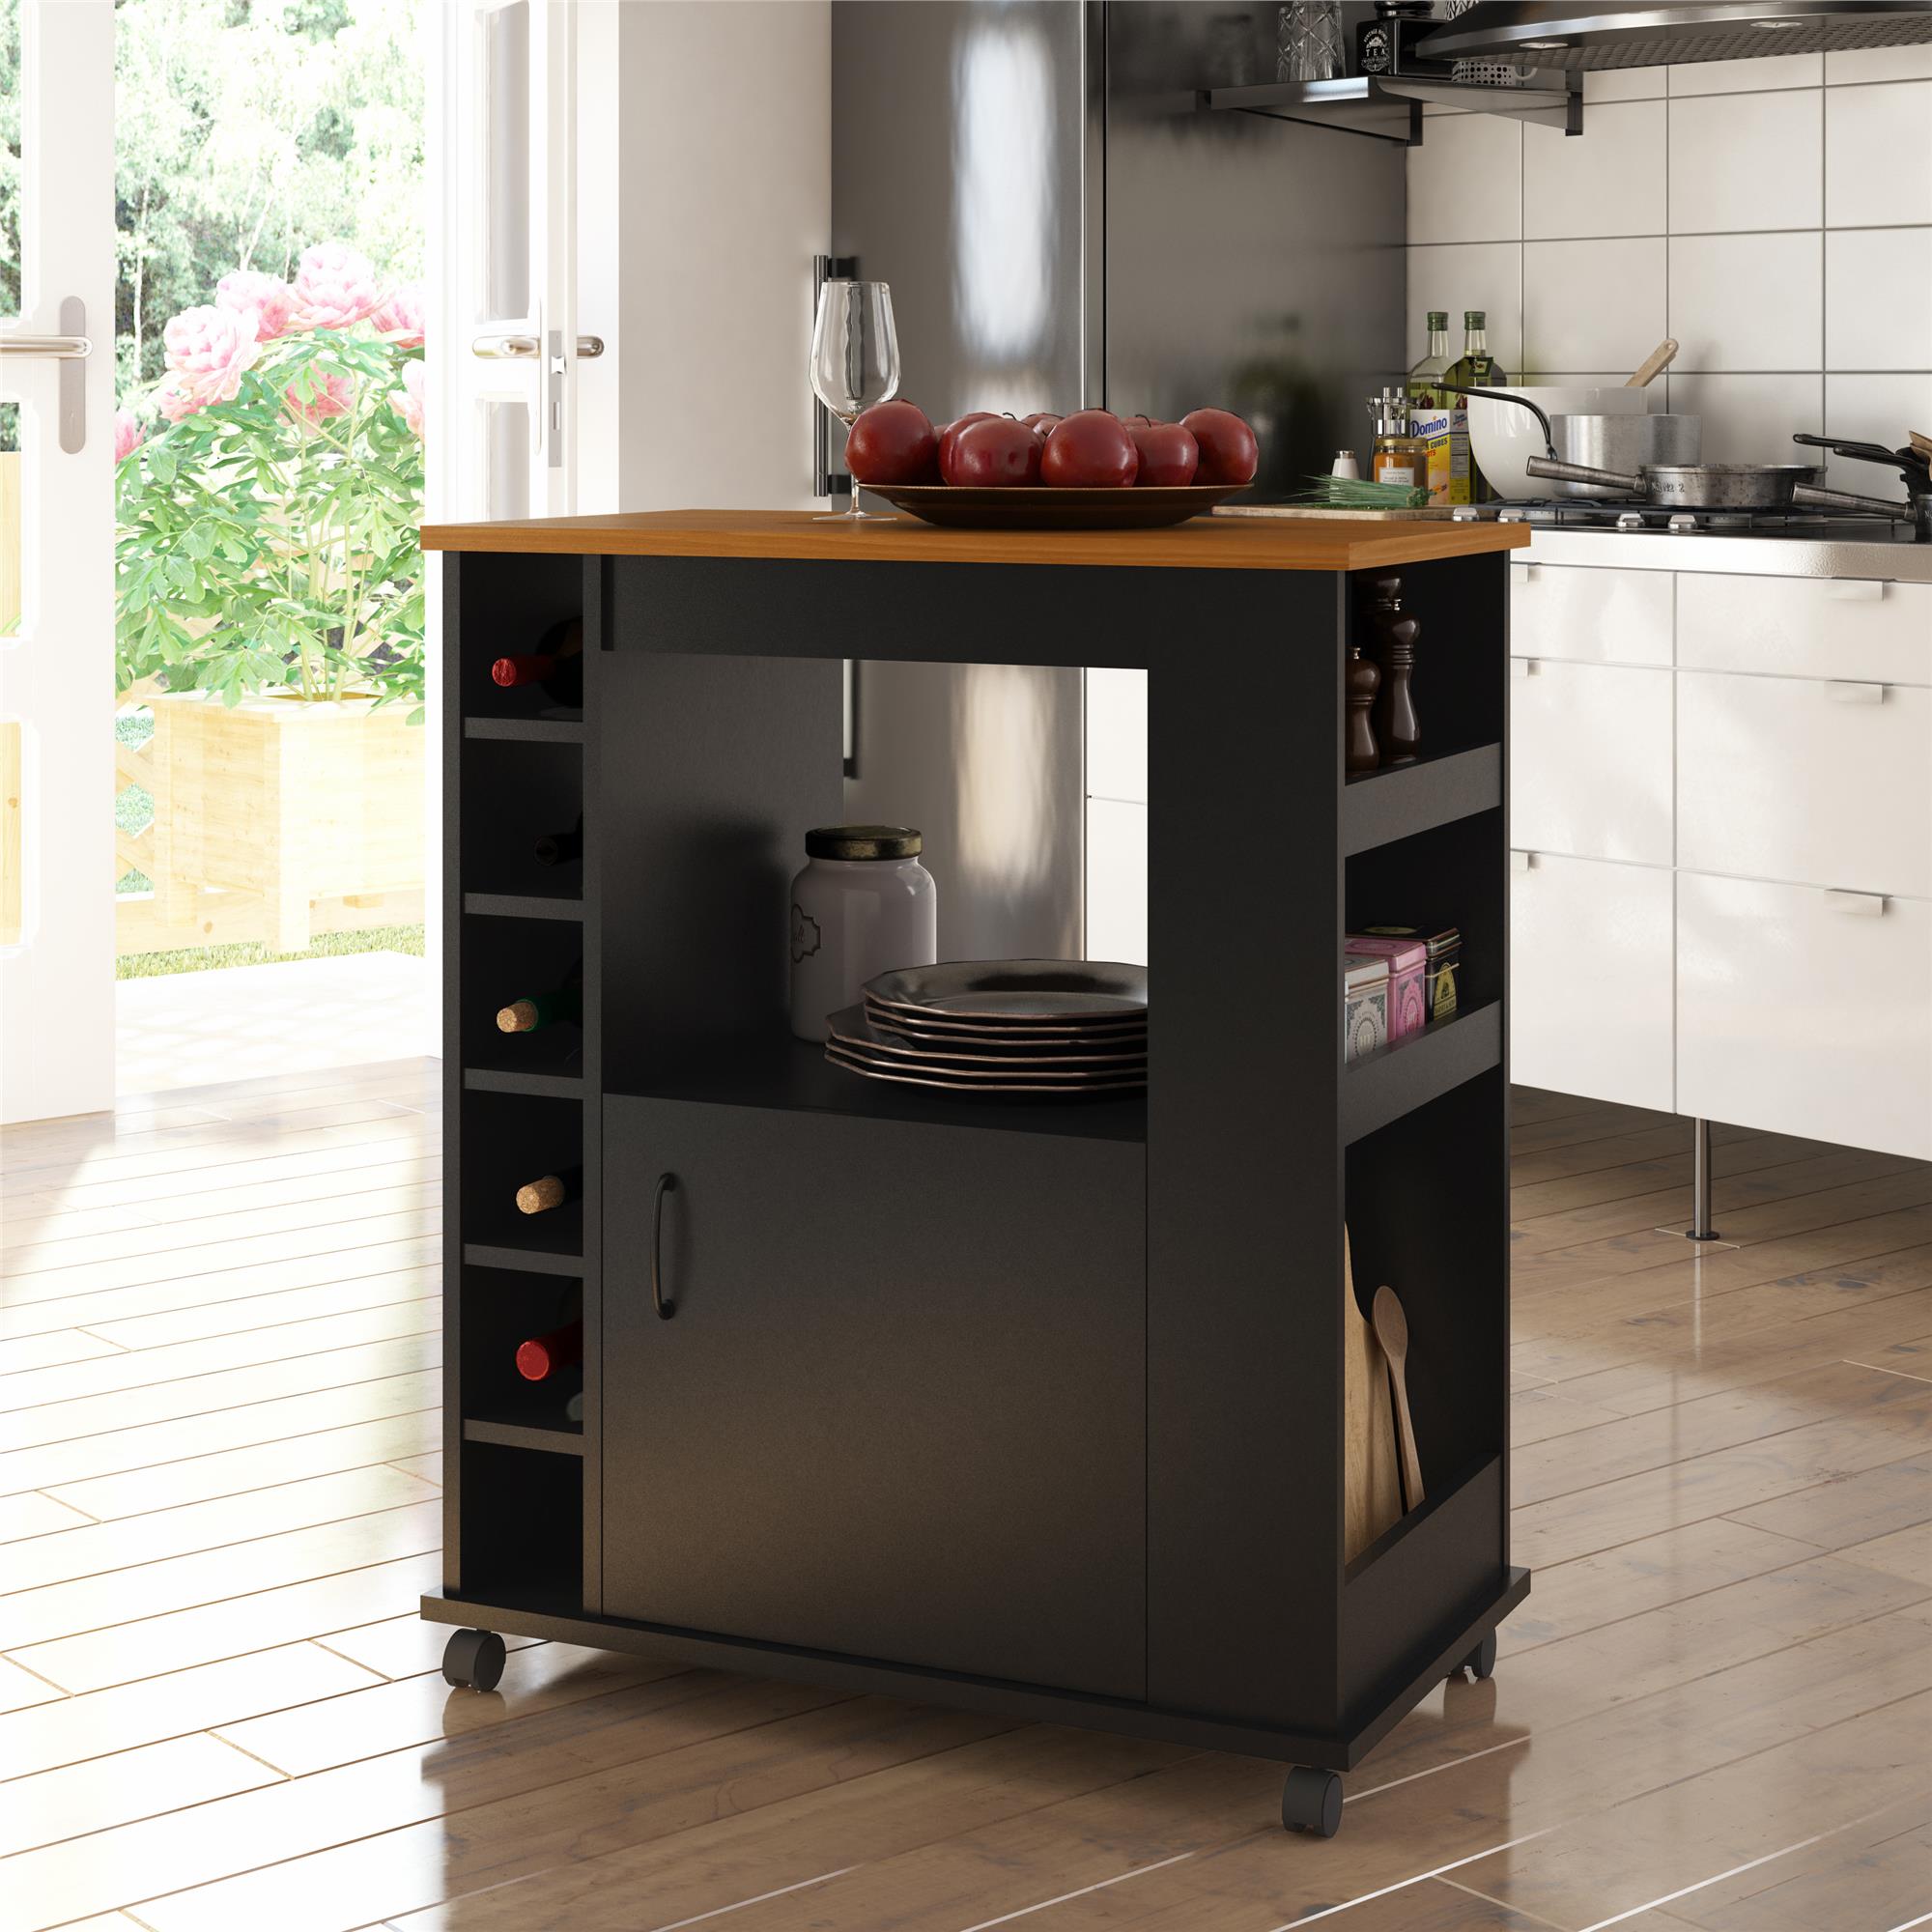 Ameriwood Home Williams Kitchen Island Microwave Cart with Rolling Casters, Black - image 2 of 12